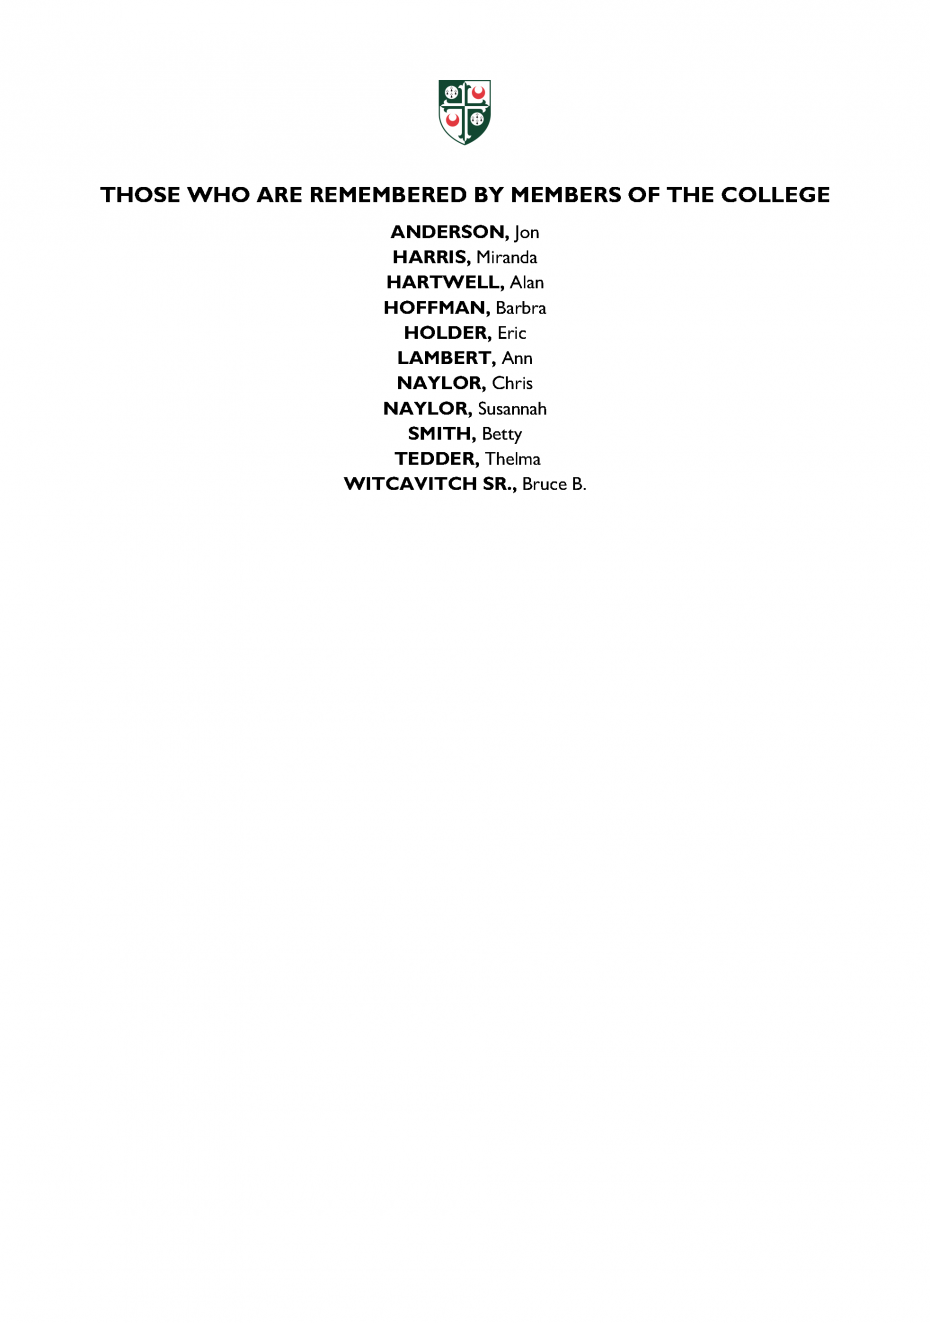 A list of those who are remembered by members of the College